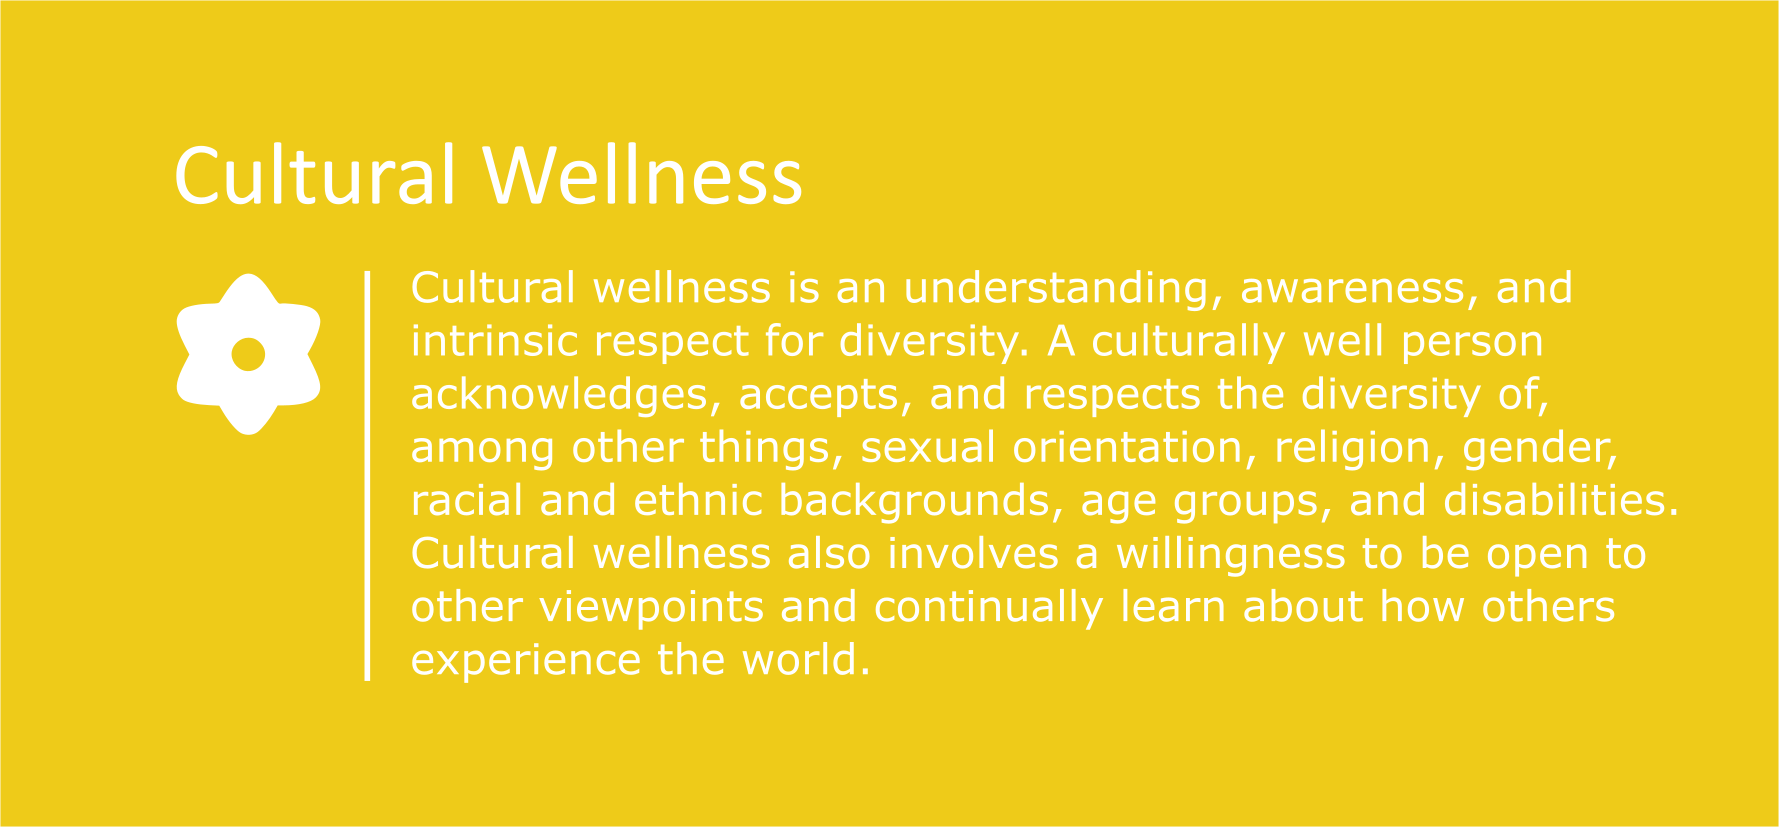 Cultural wellness is an understanding, awareness, and intrinsic respect for diversity. A culturally well person acknowledges, accepts, and respects the diversity of, among other things, sexual orientation, religion, gender, racial and ethnic backgrounds, age groups, and disabilities. Cultural wellness also involves a willingness to be open to other viewpoints and continually learn about how others experience the world.